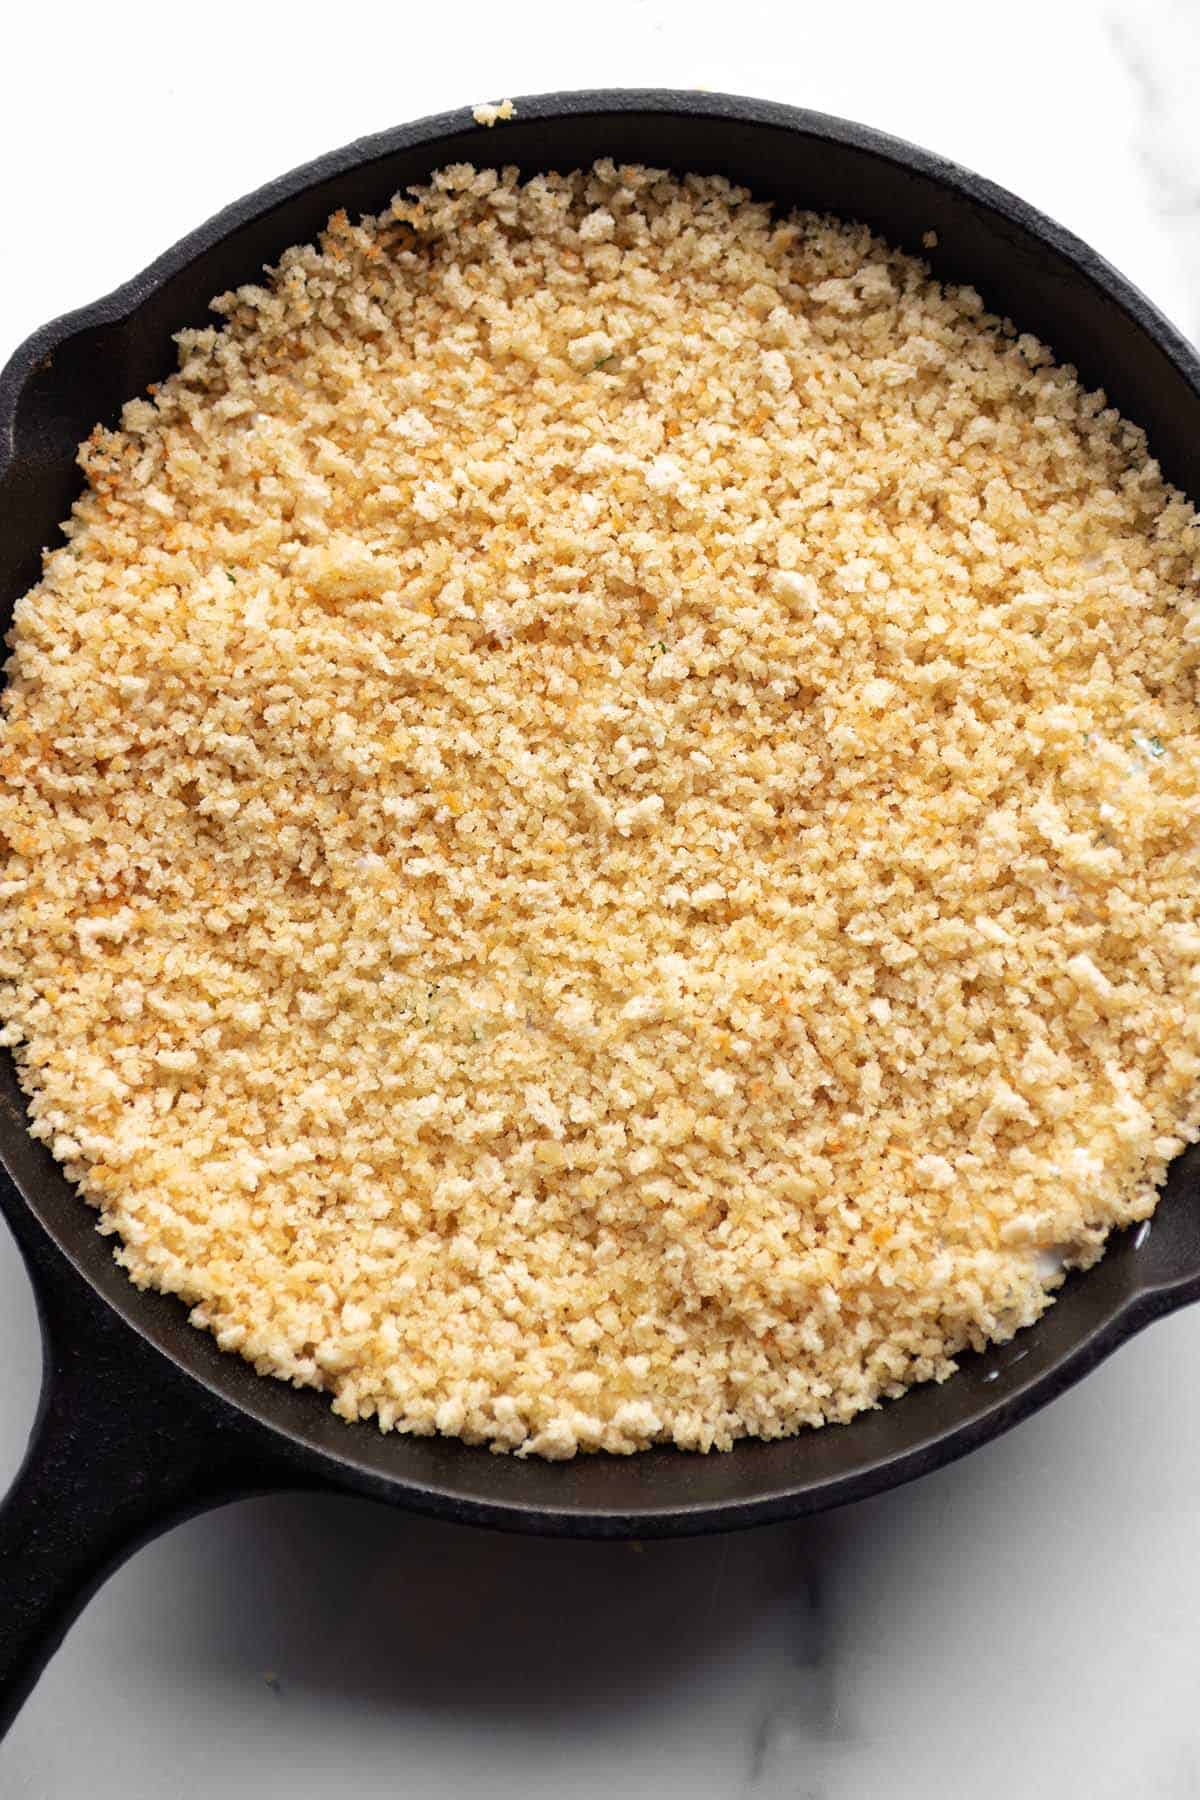 A cast iron pan with a dip and panko crumbs spread over the top.